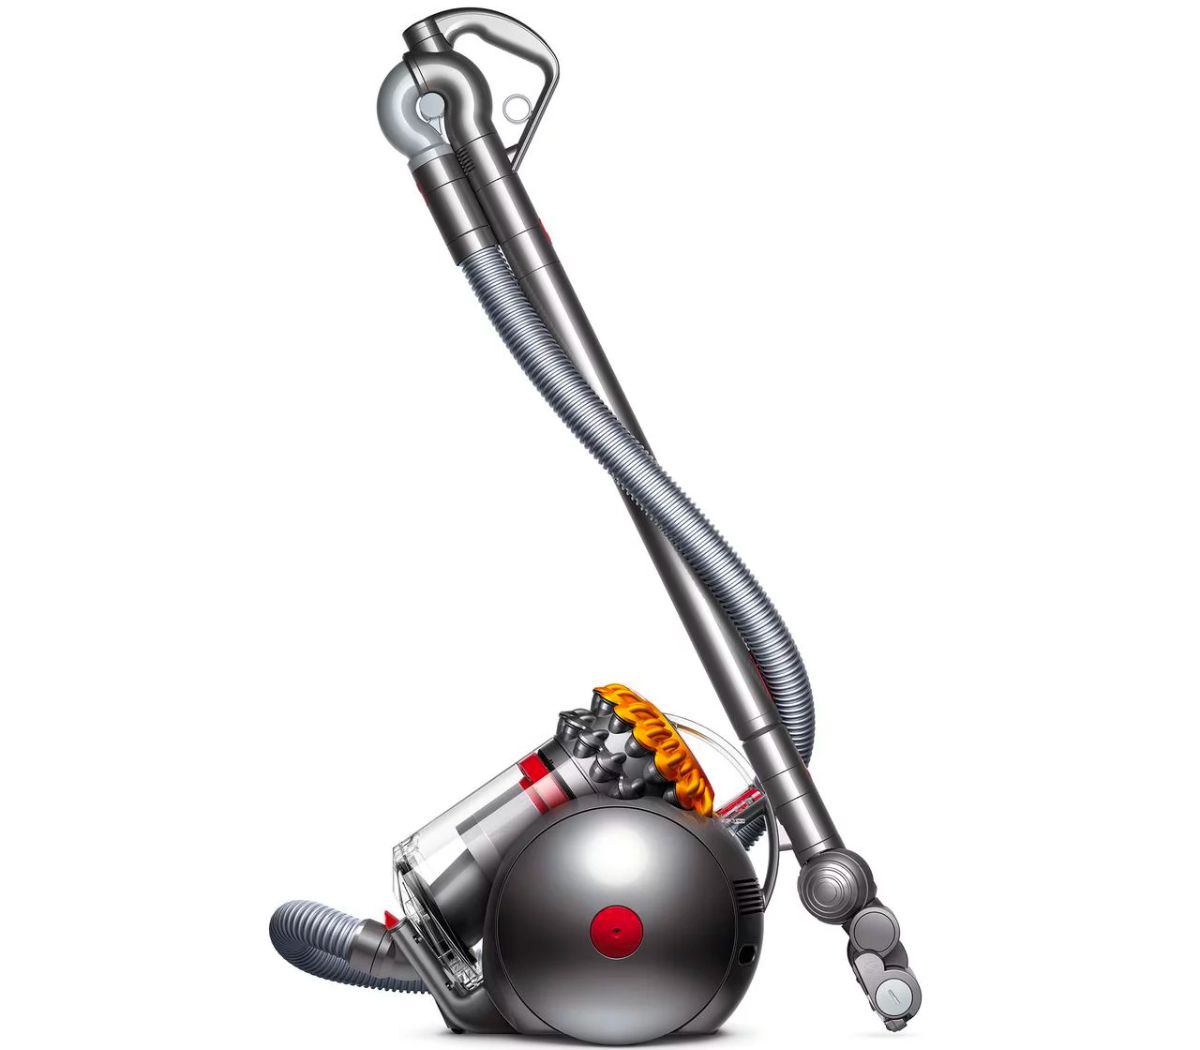 Dyson big ball canister vacuum full image